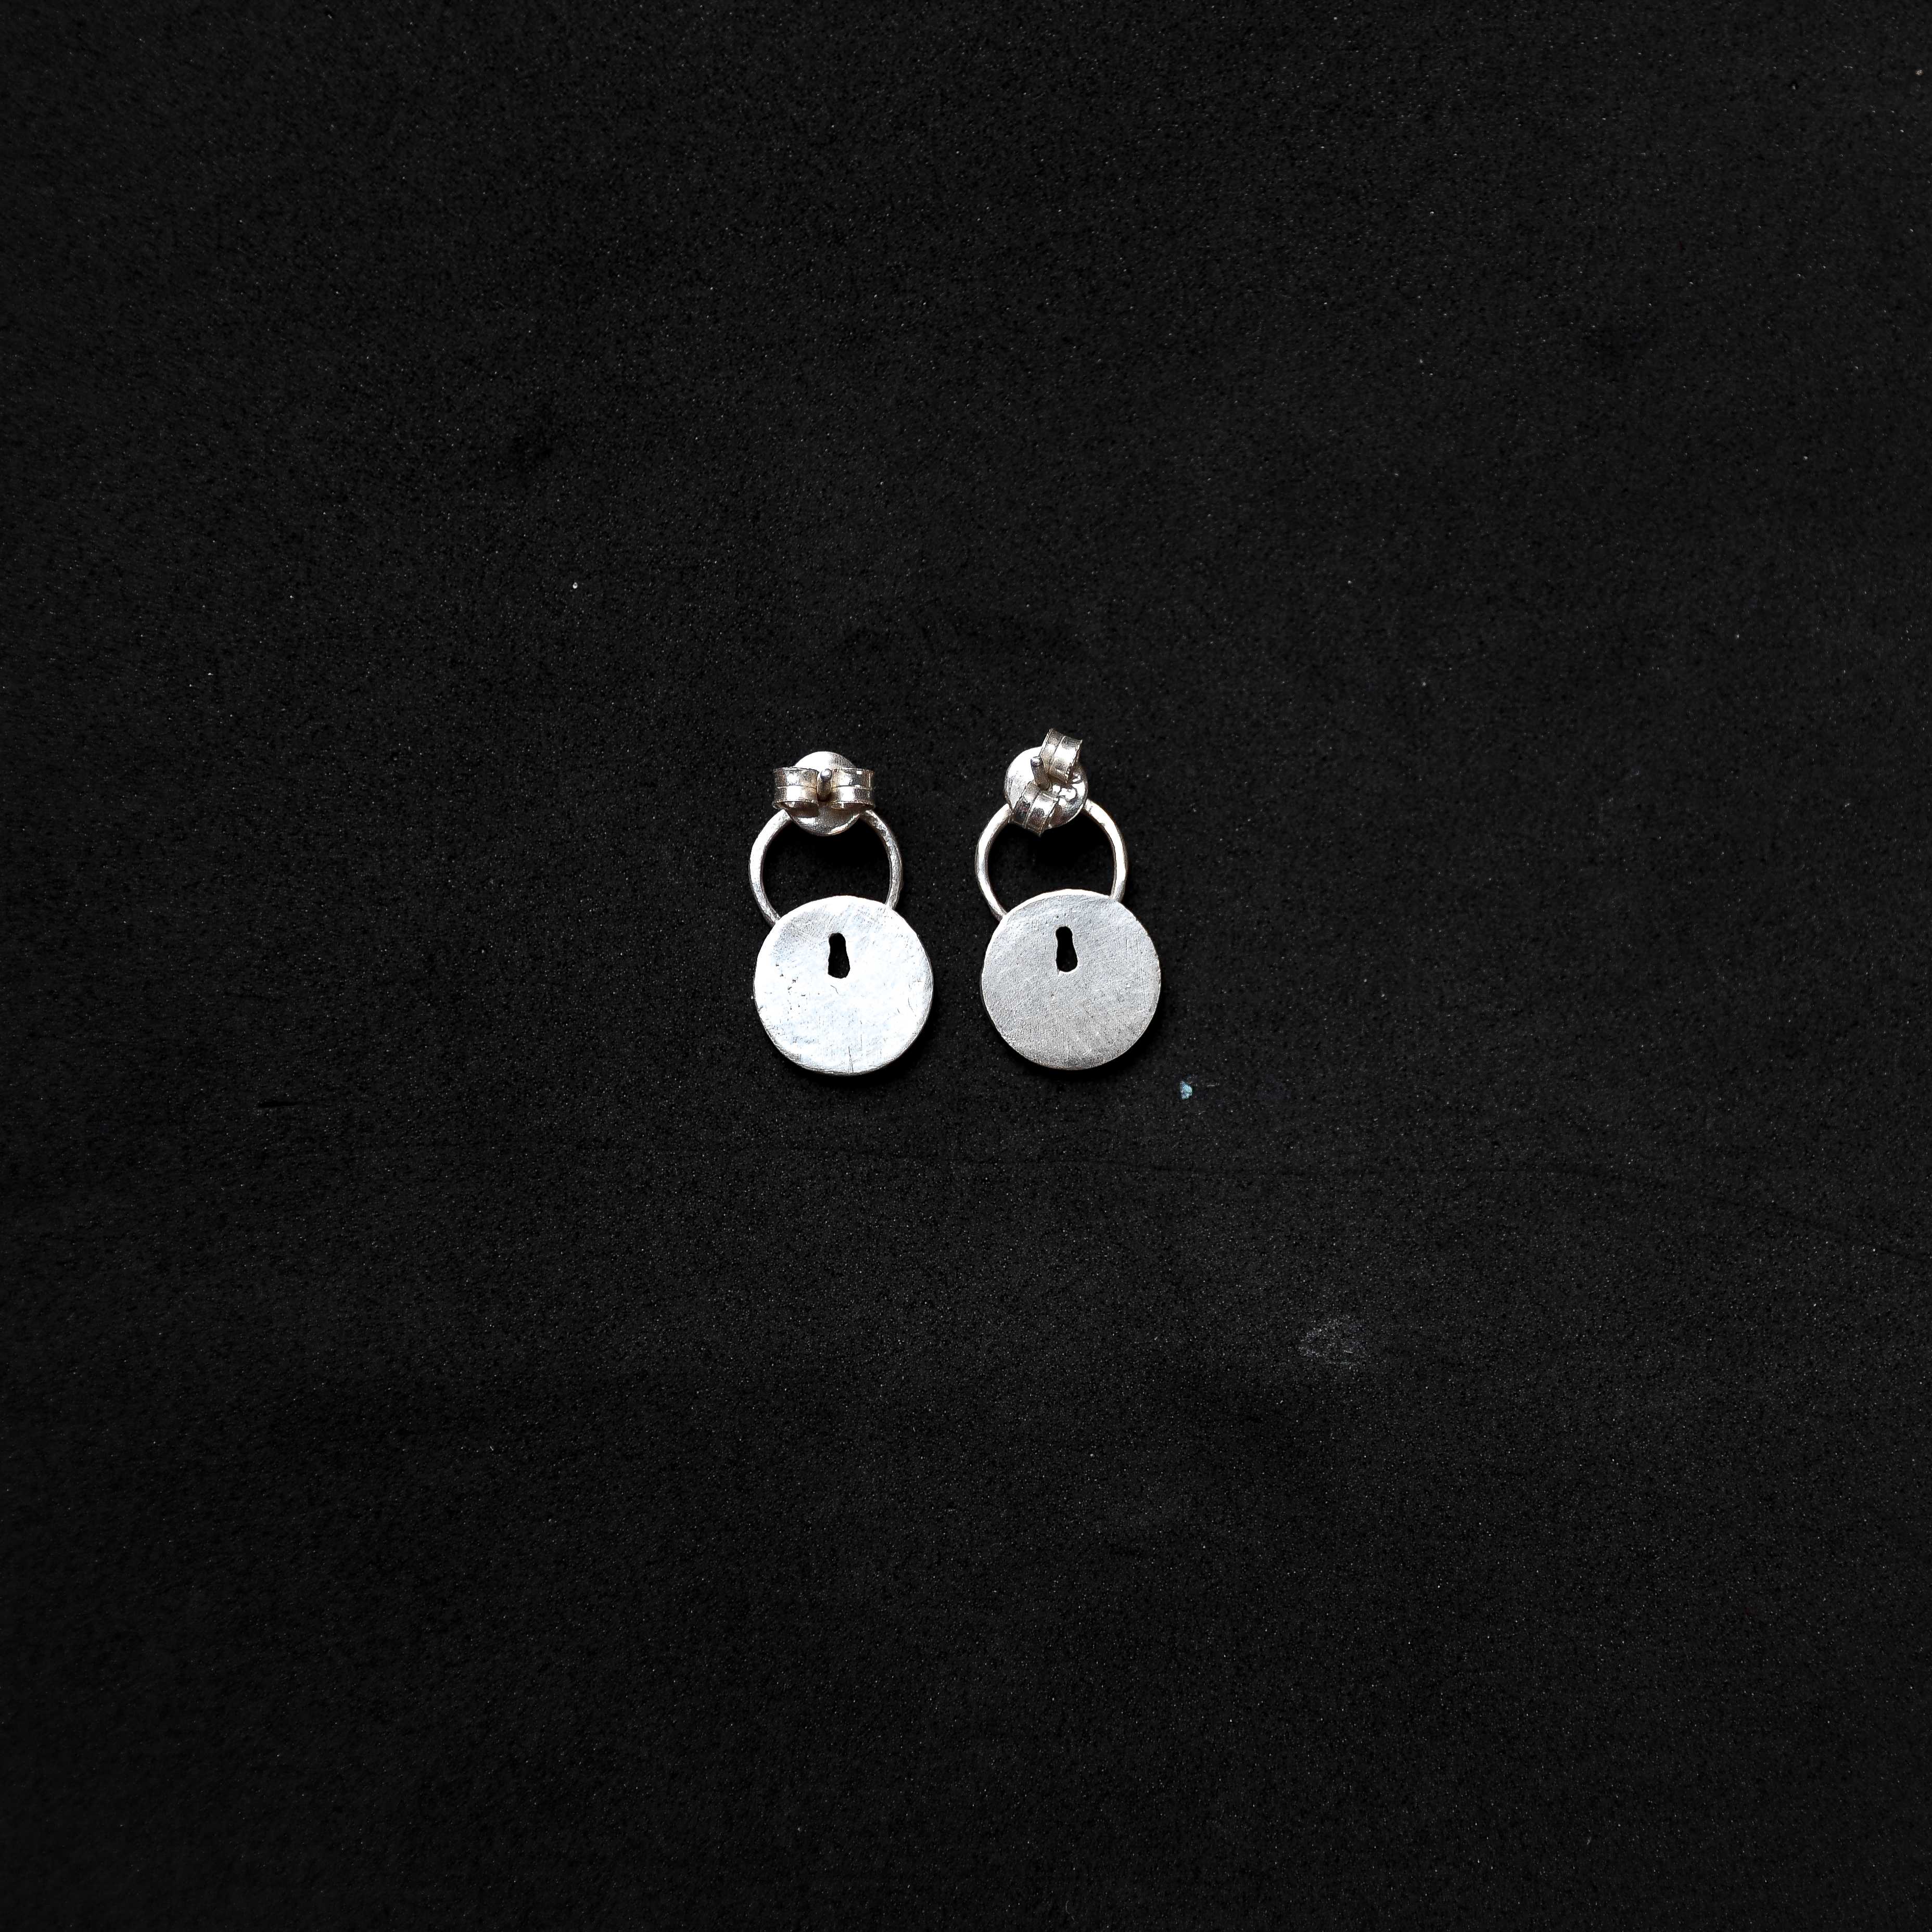 Adorn Your Ears with Quirksmith Taala Chaabi Studs – Handcrafted Silver Earstuds